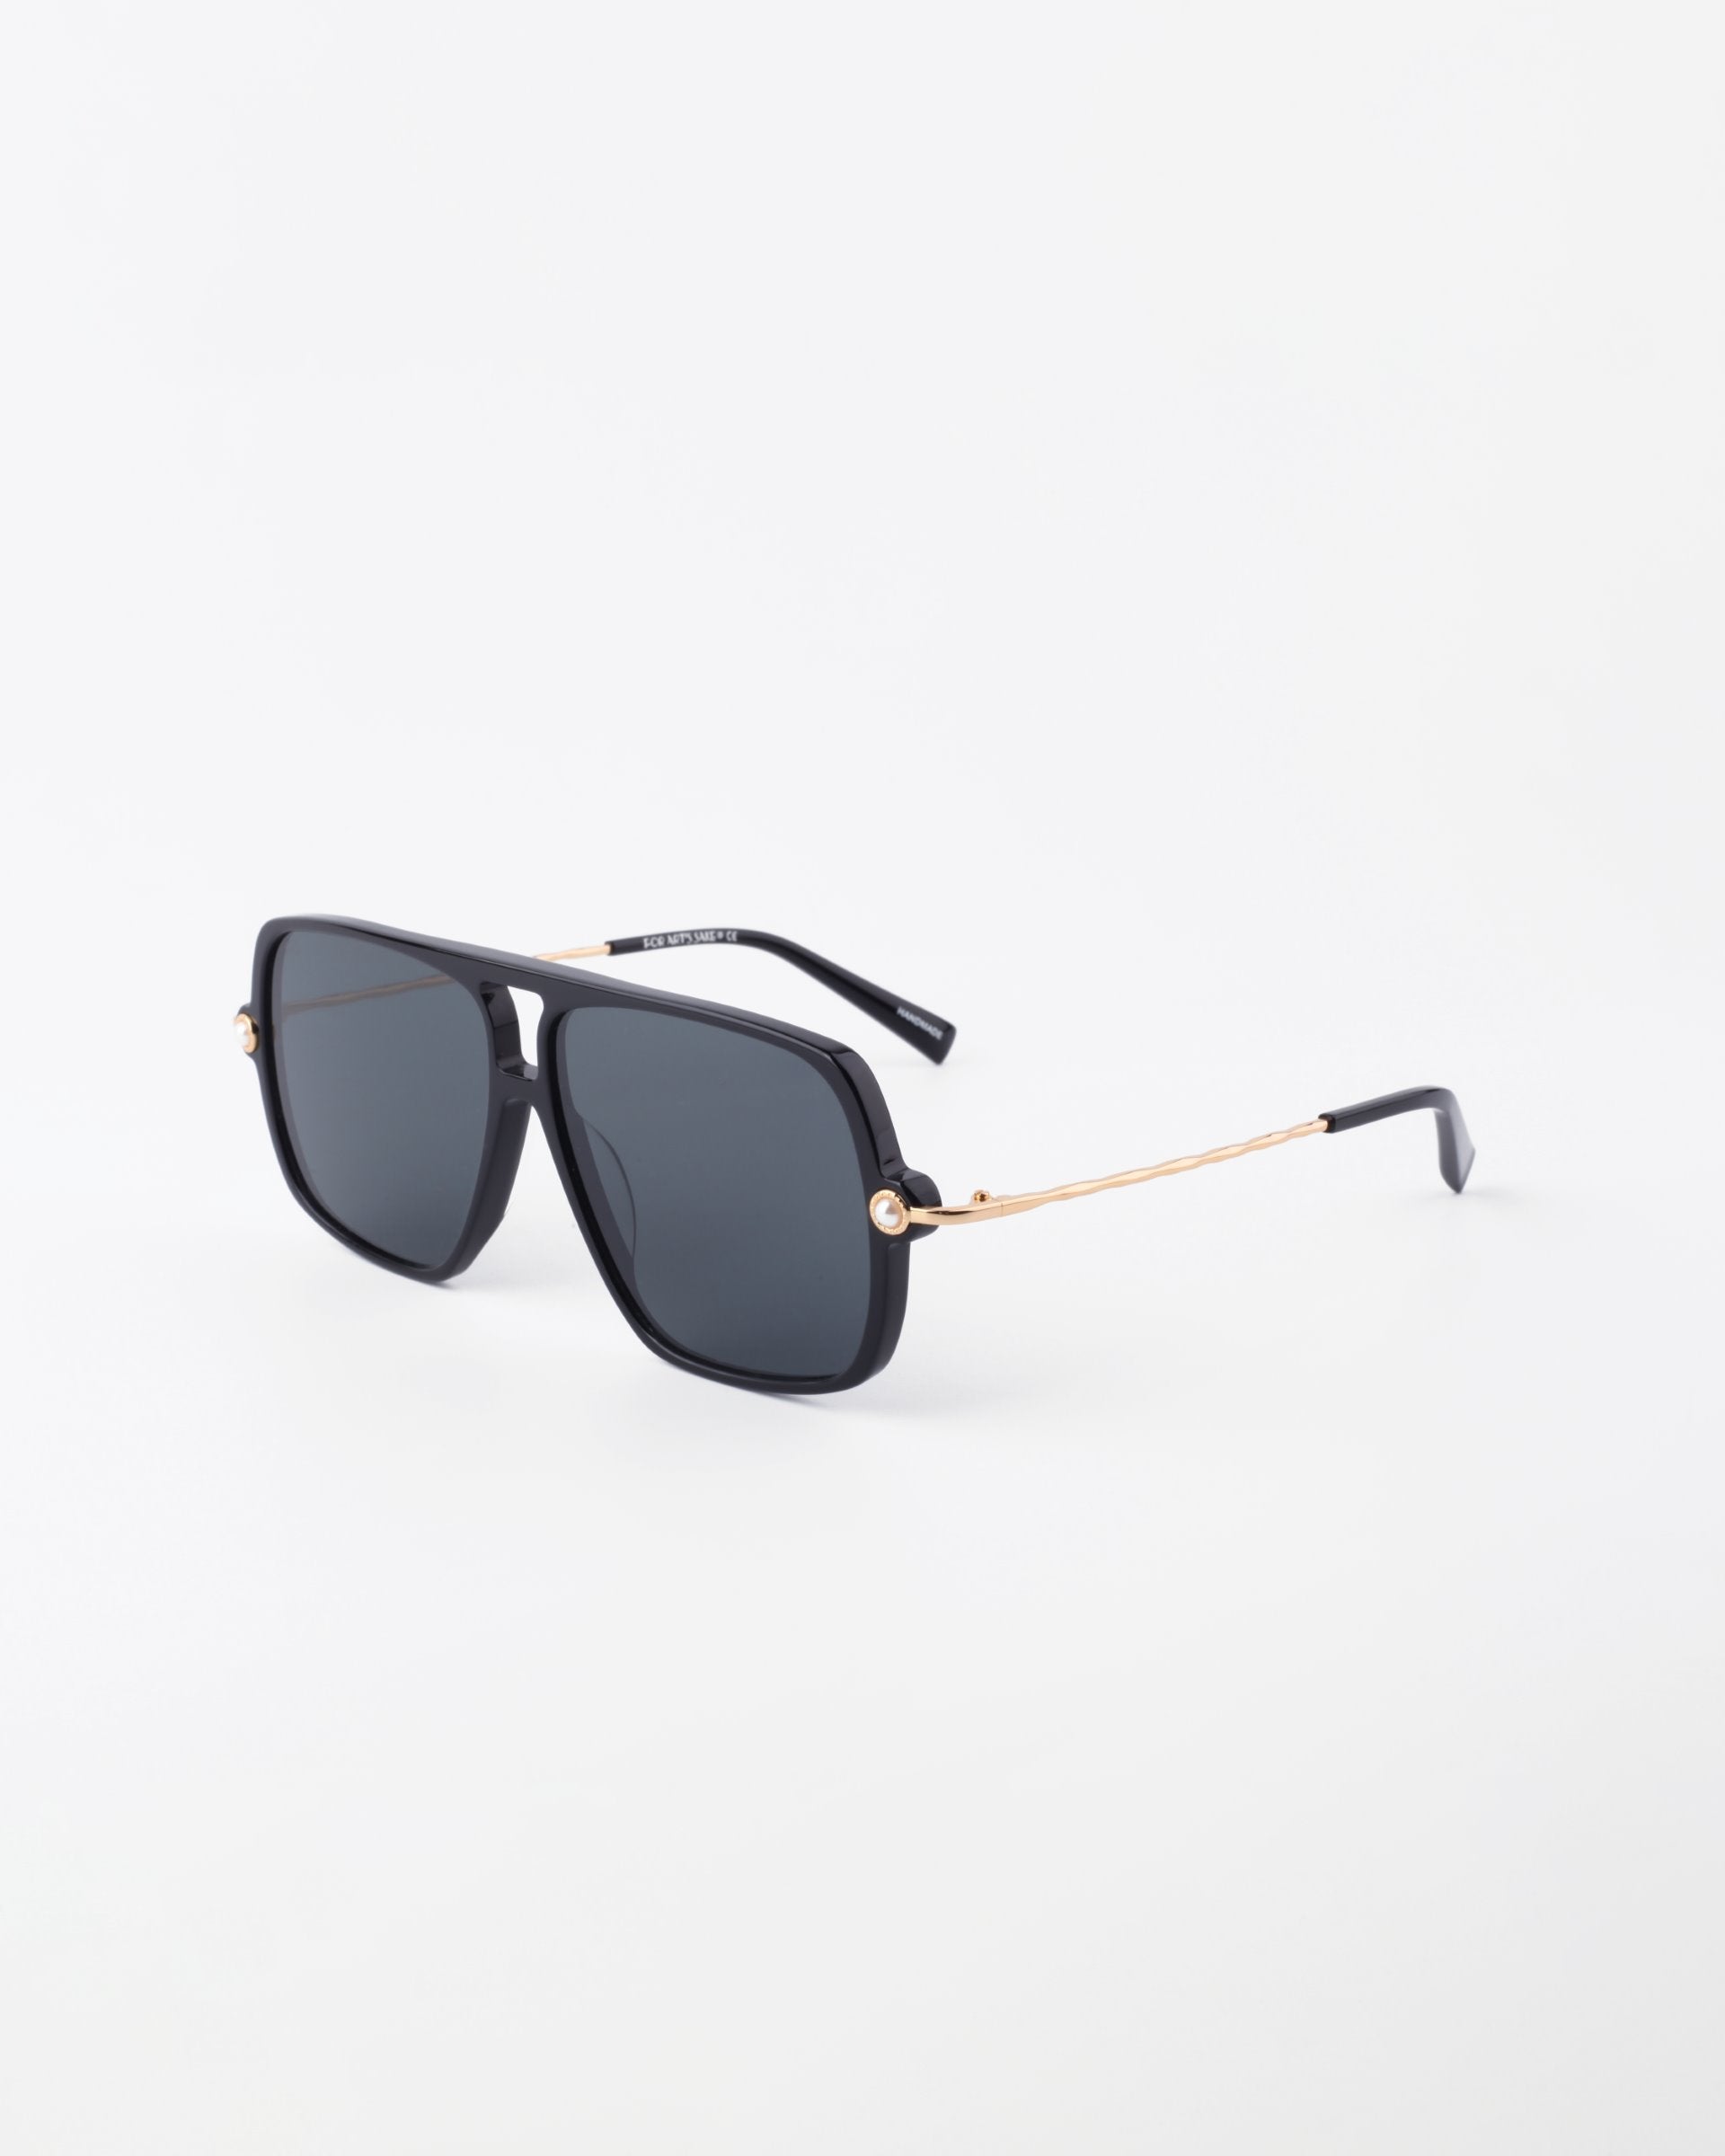 A pair of stylish Cinnamon aviator sunglasses by For Art&#39;s Sake® with black rectangular frames and dark tinted lenses. The temples are 18-karat gold-plated with a sleek design and black tips, featuring subtle faux pearl embellishment. The sunglasses are set against a white background.